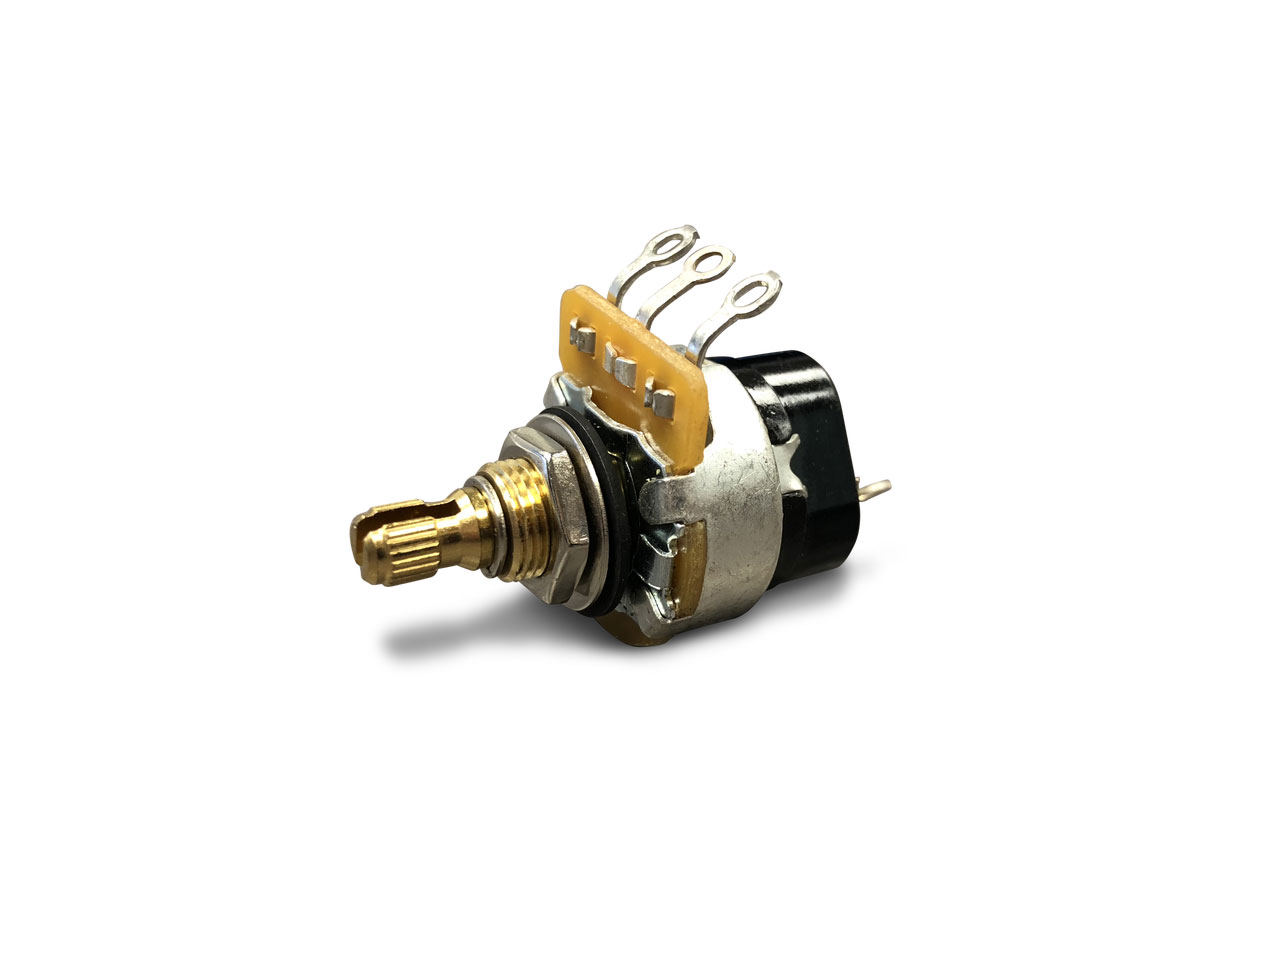 GIBSON ACCESSORIES PARTS 500K OHM AUDIO TAPER POTENTIOMETER LONG SHAFT